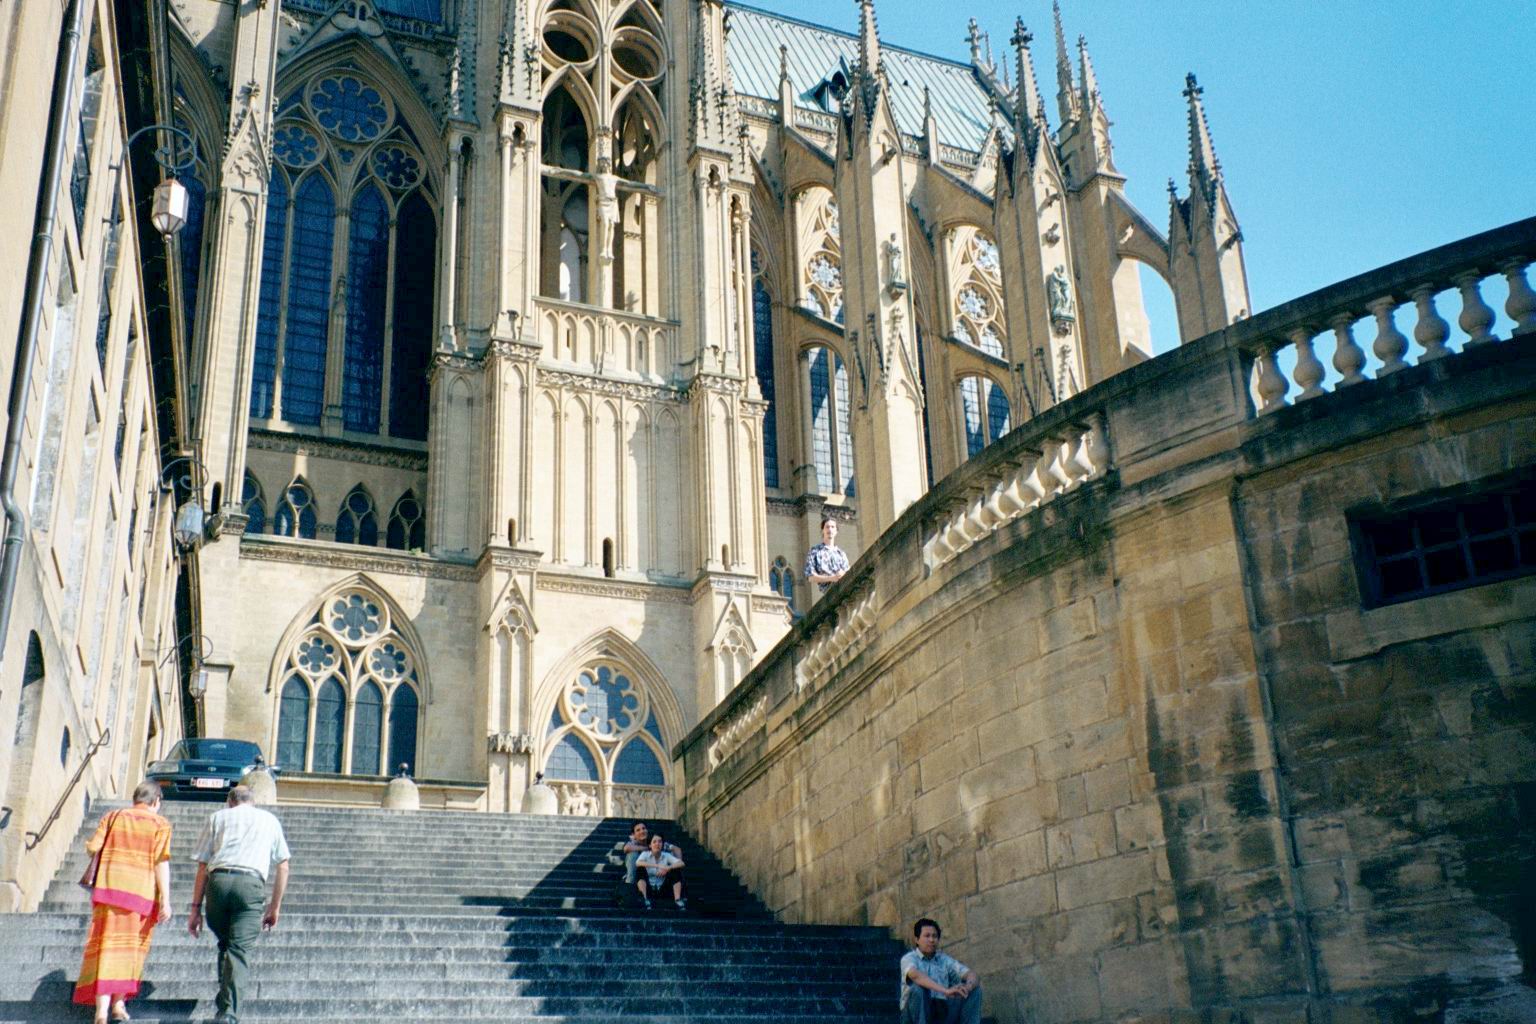 Flying buttresses of the cathedral in Metz